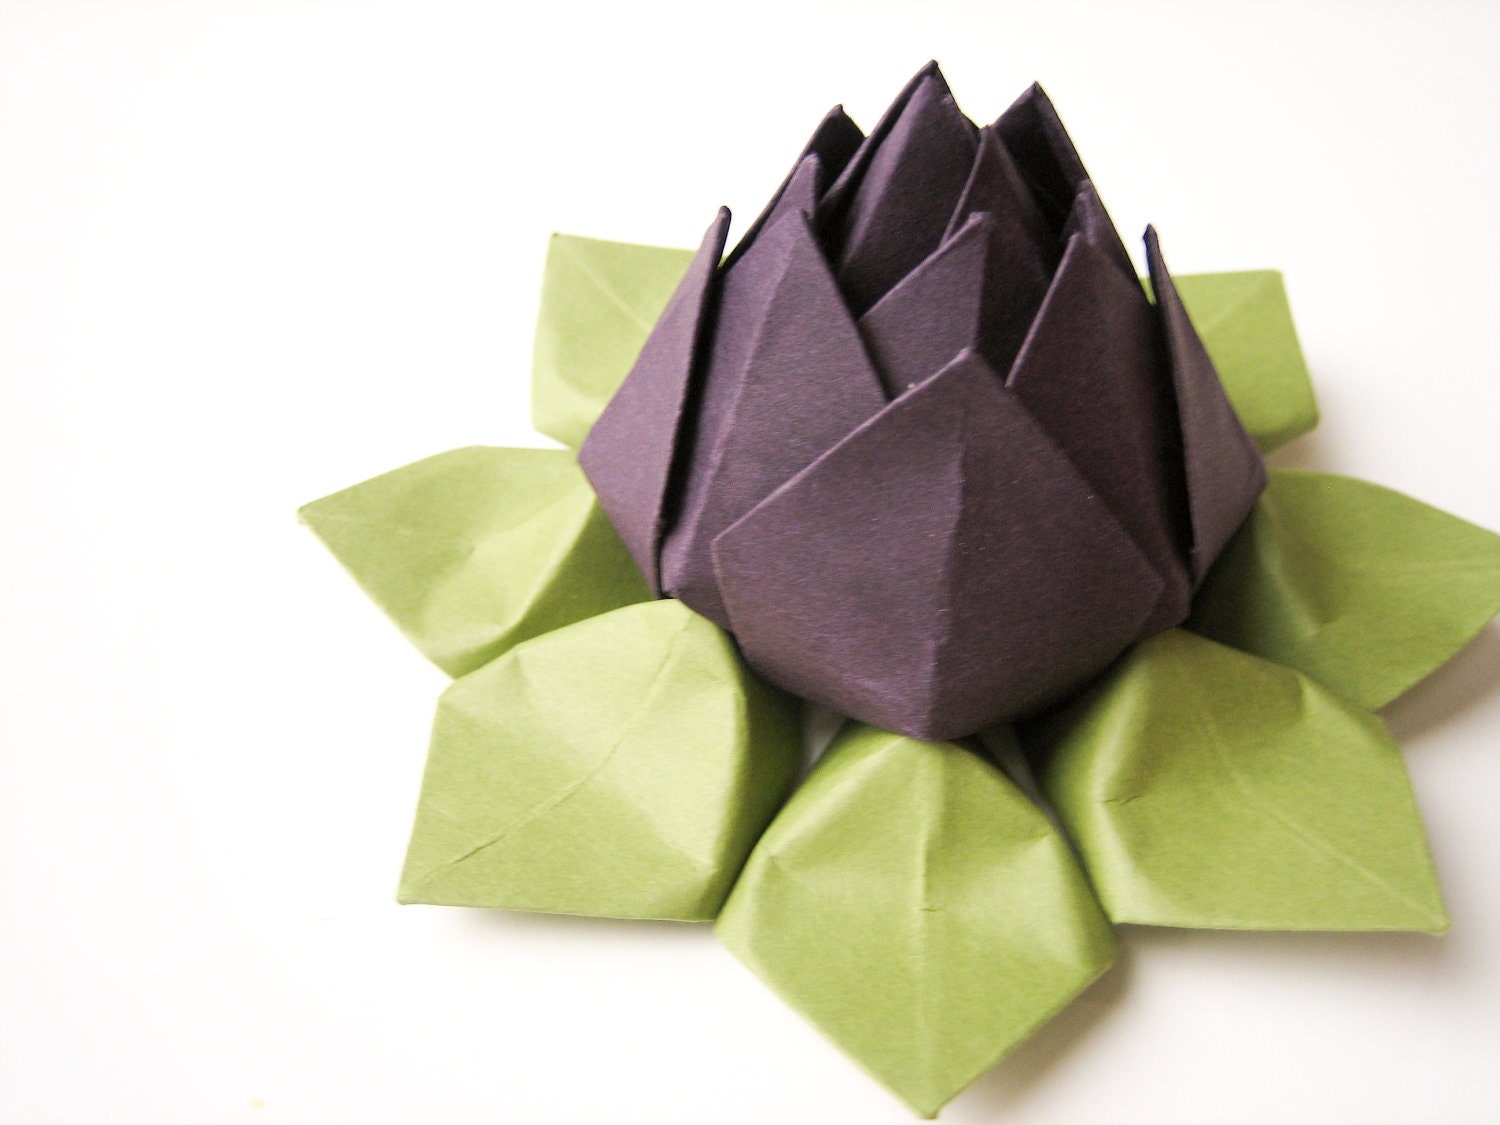 Lotus Flower - Origami paper flower - Eggplant Purple, Moss Green - autumn decor, hostess gift, birthday gift, can be shipped directly